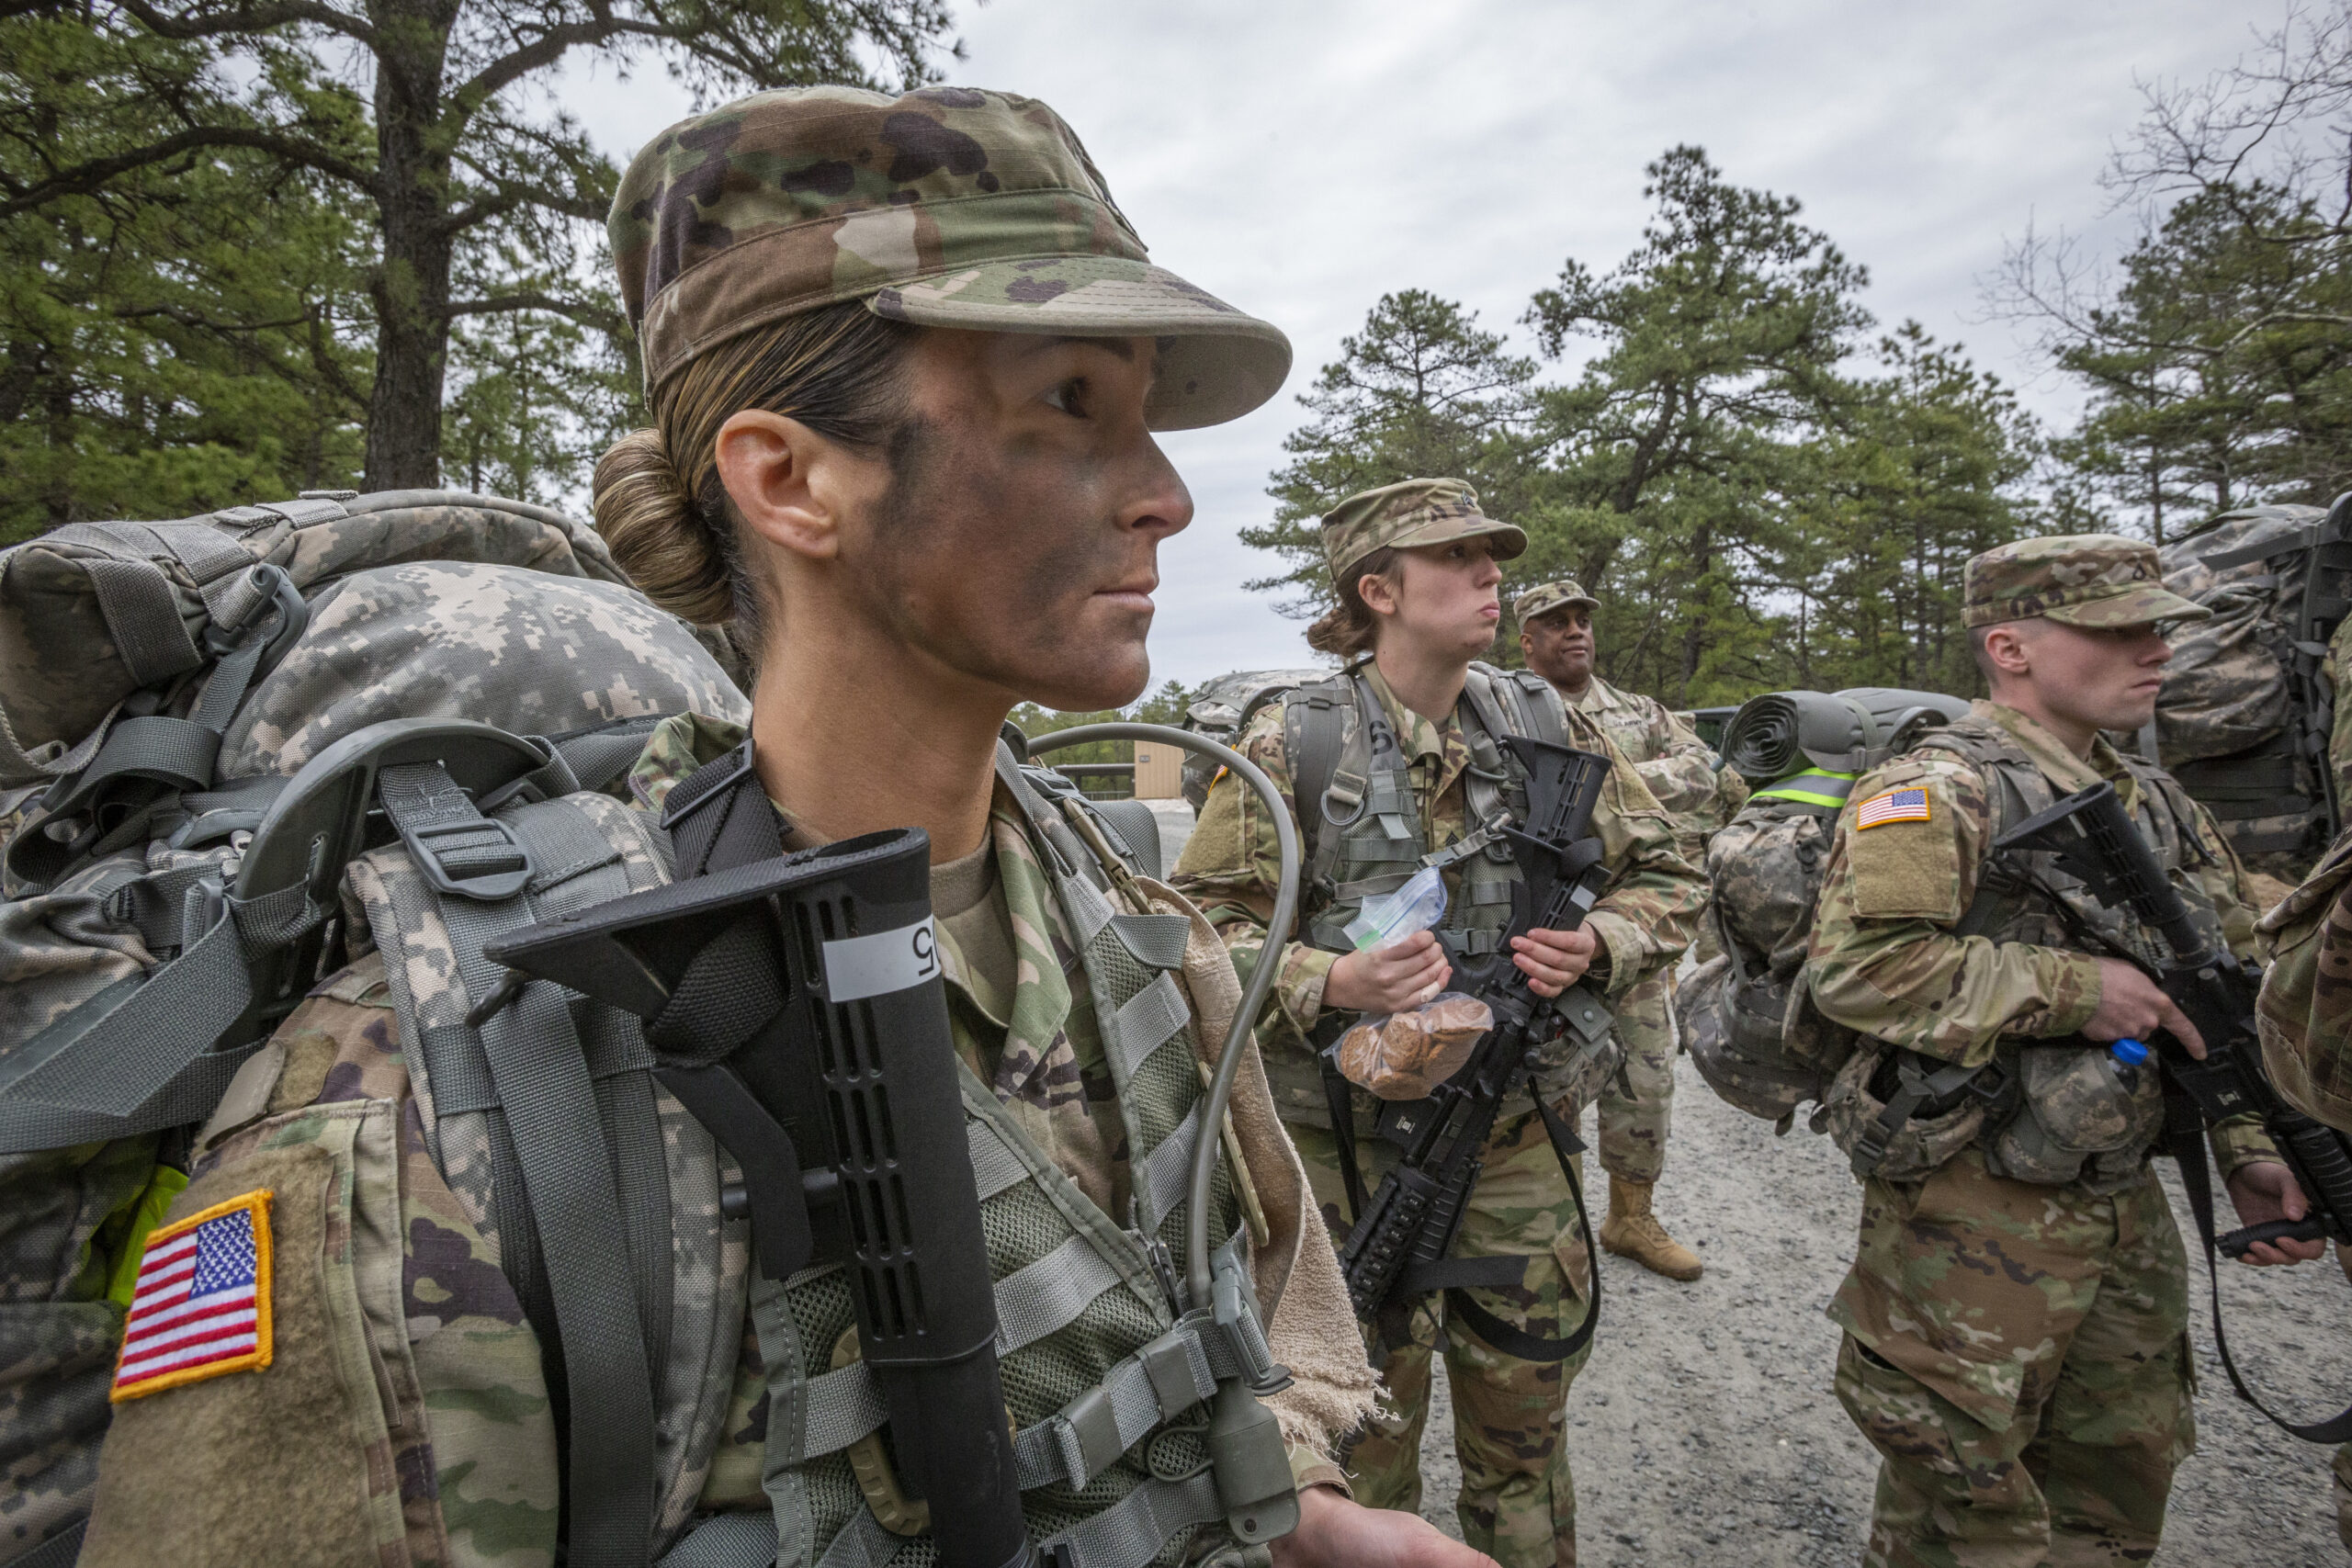 Carrying the weight: The undue burdens that female troops endure every day